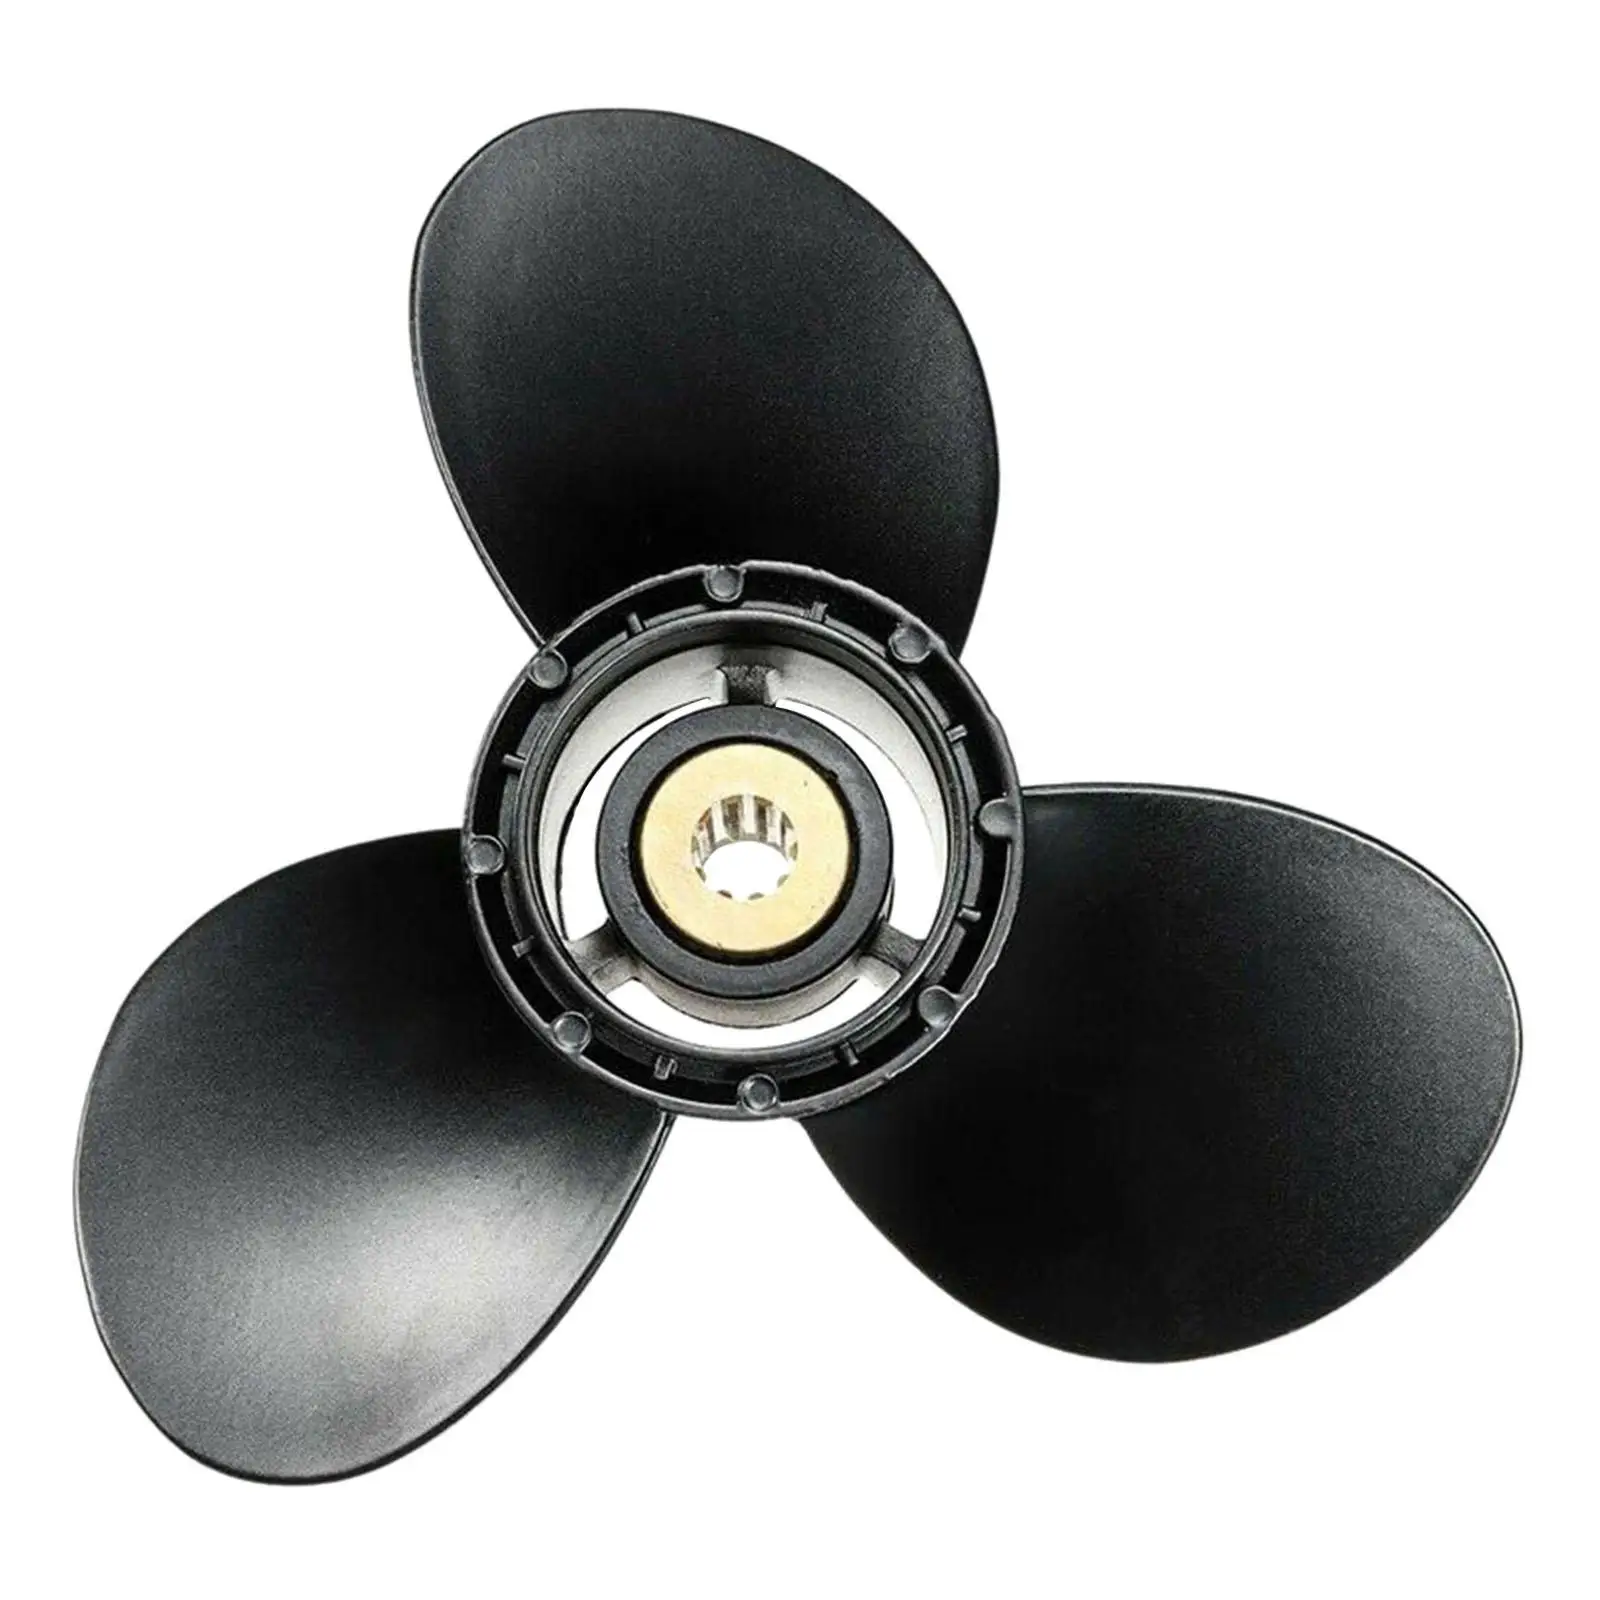 Boat Motor Propeller Replacement 58100-93723-019 3 Blade Prop Fit for Suzuki Outboard Engines 8-20HP